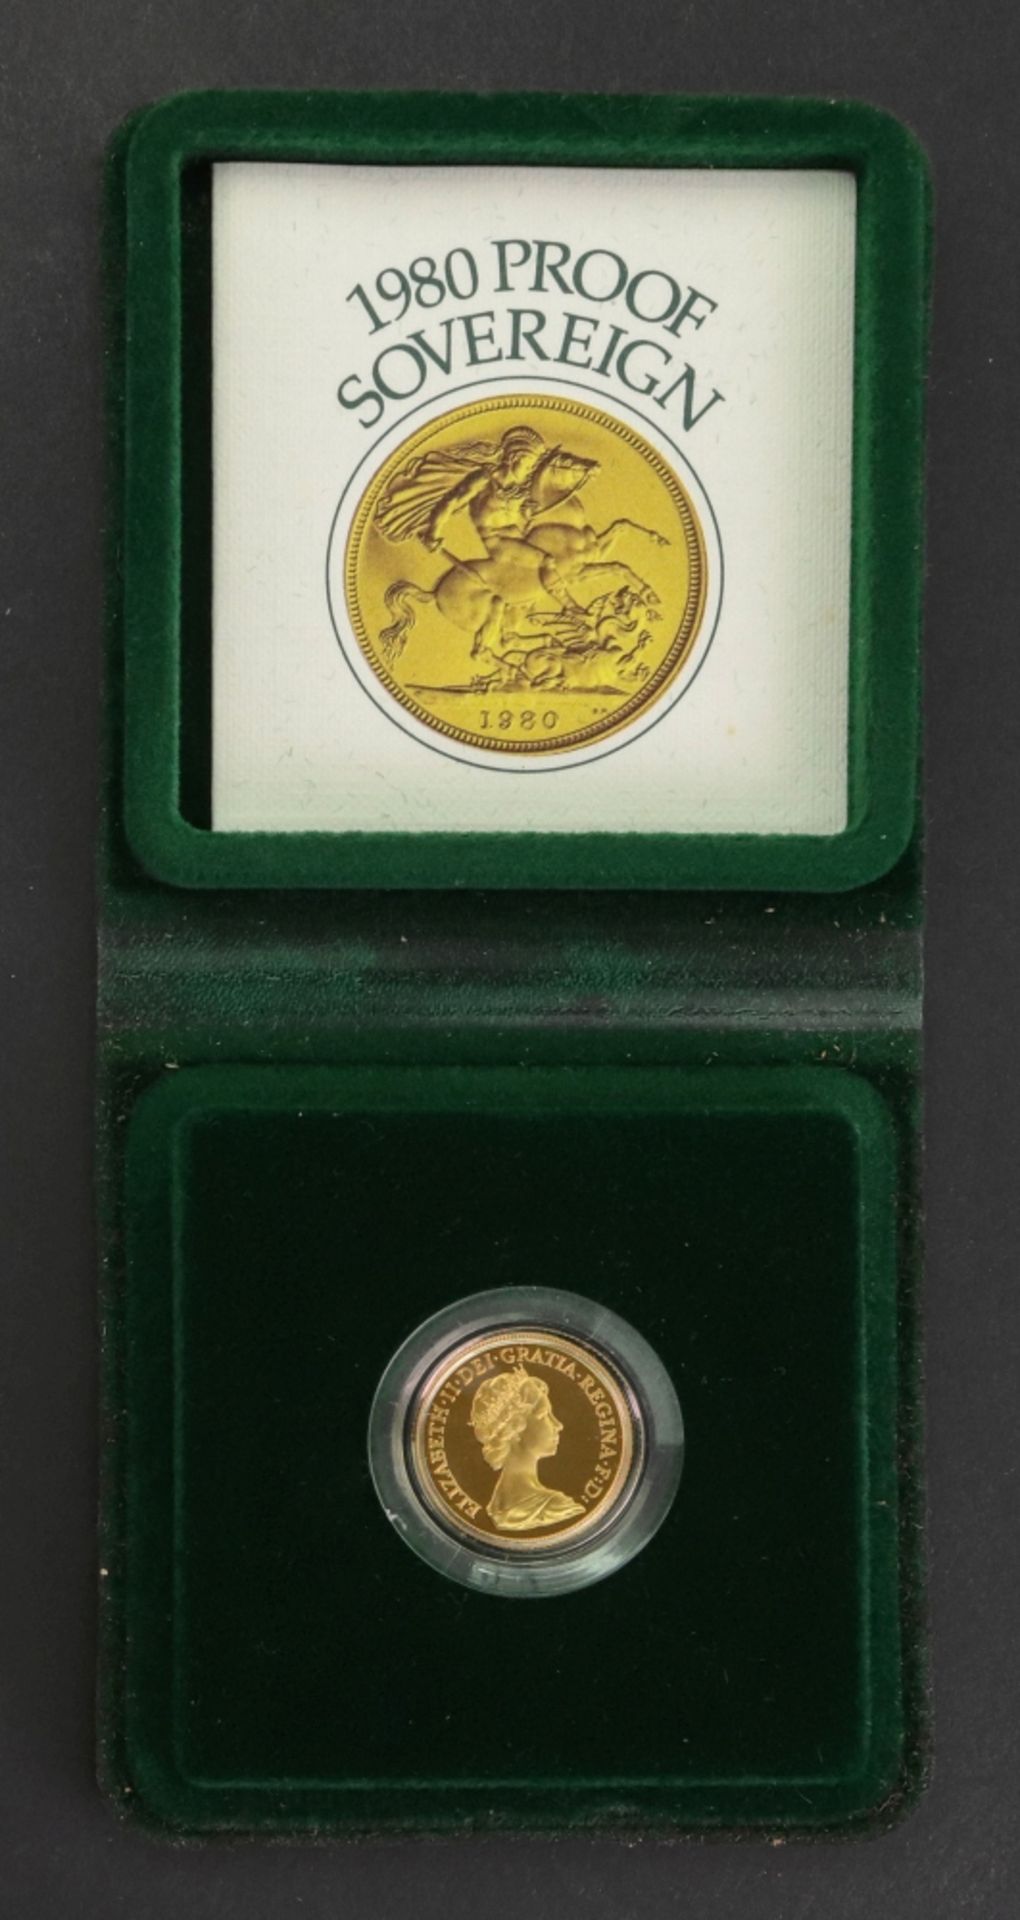 1980 Proof sovereign, cased.